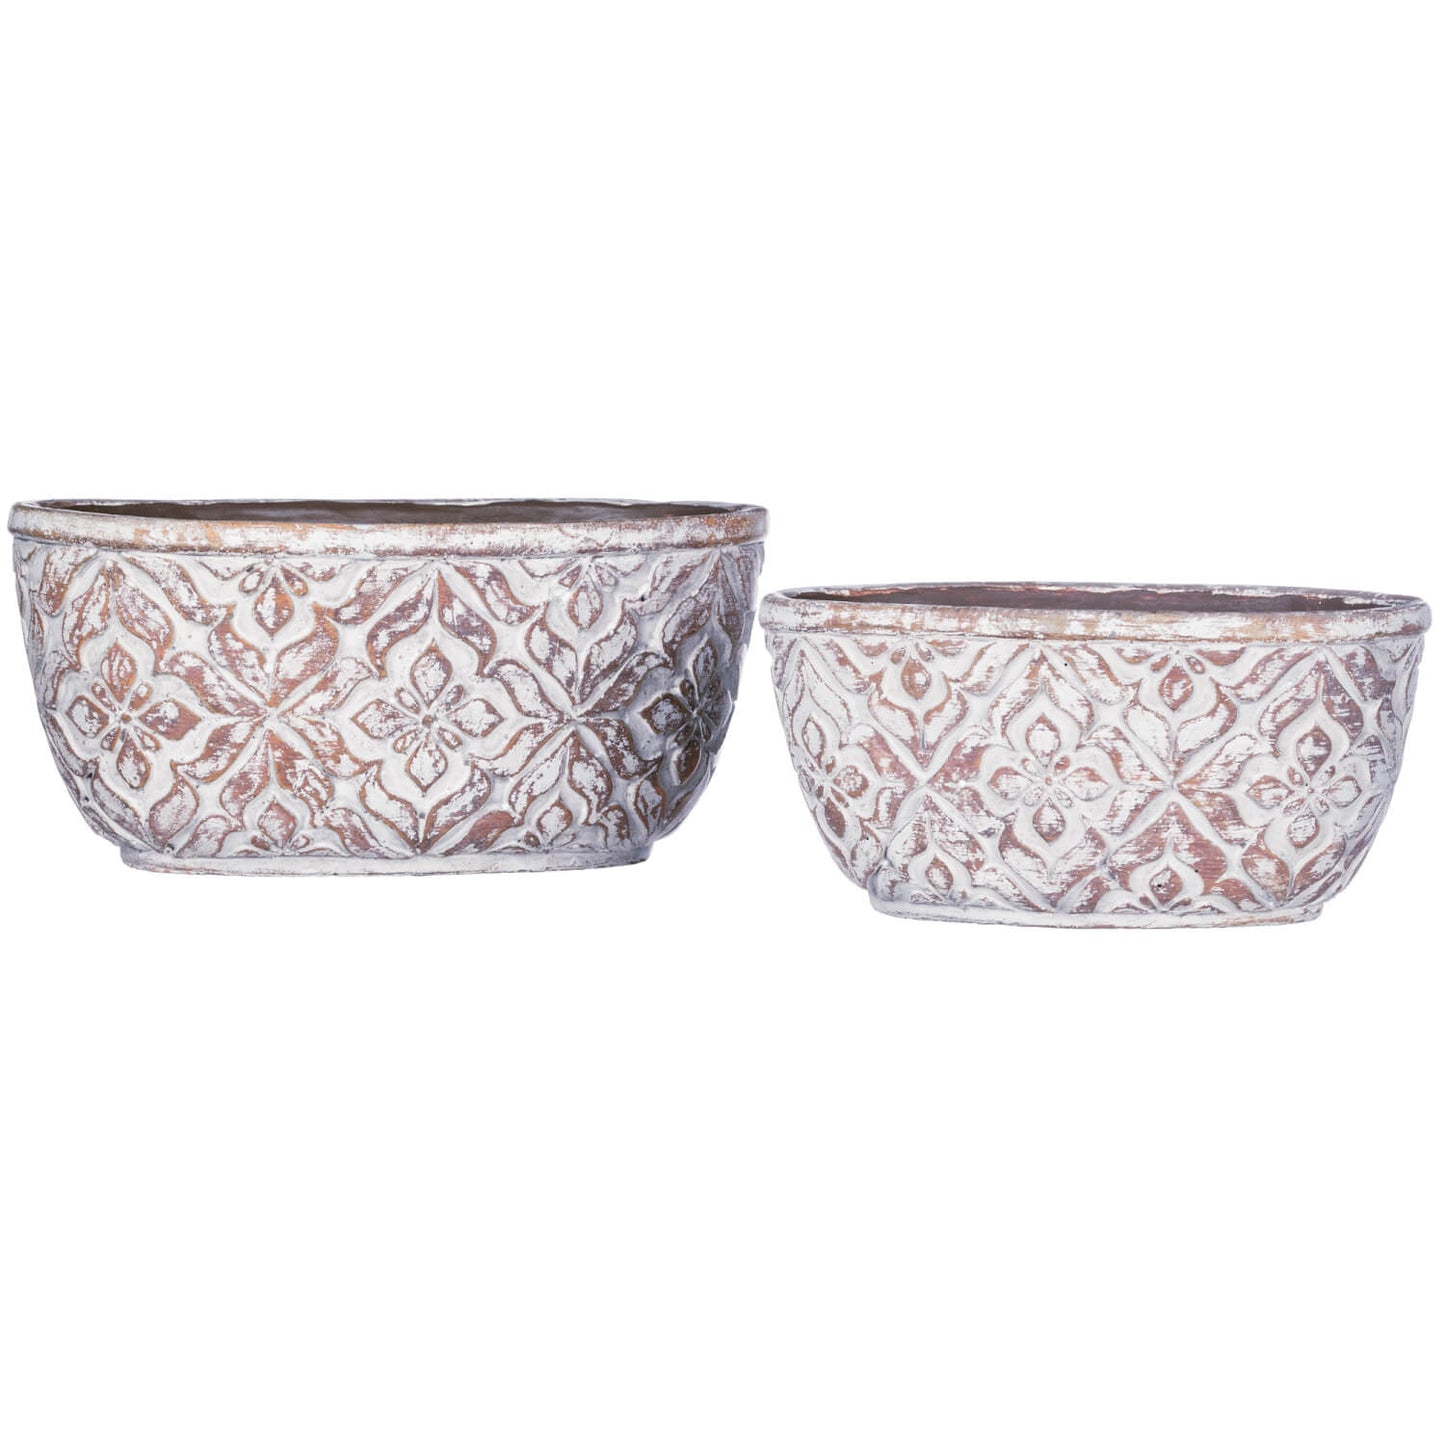 small and large oval planter with flourish designs and white-washed finish.